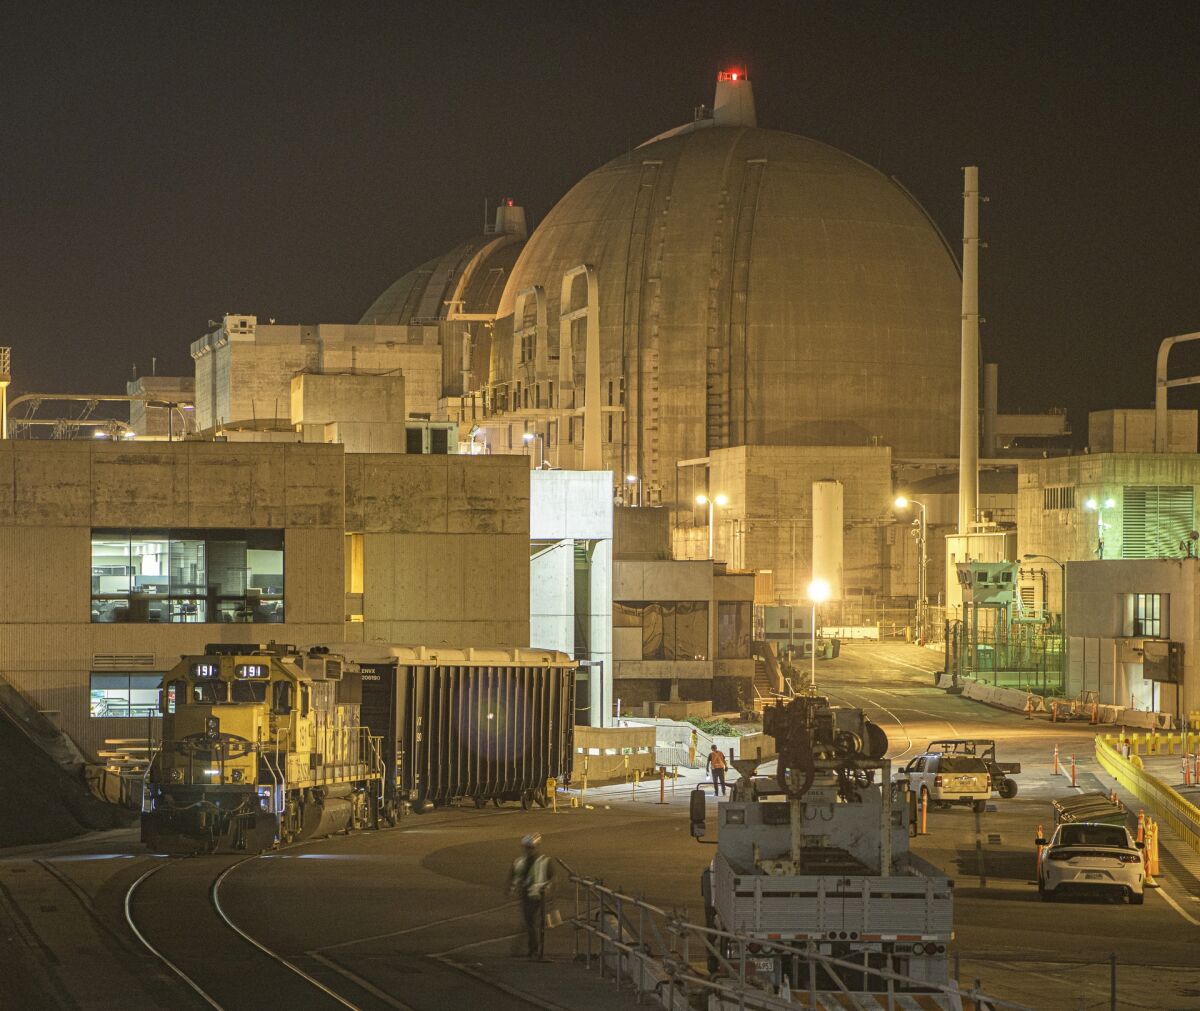 The San Onofre Nuclear Generating Station, now in the process of dismantlement.